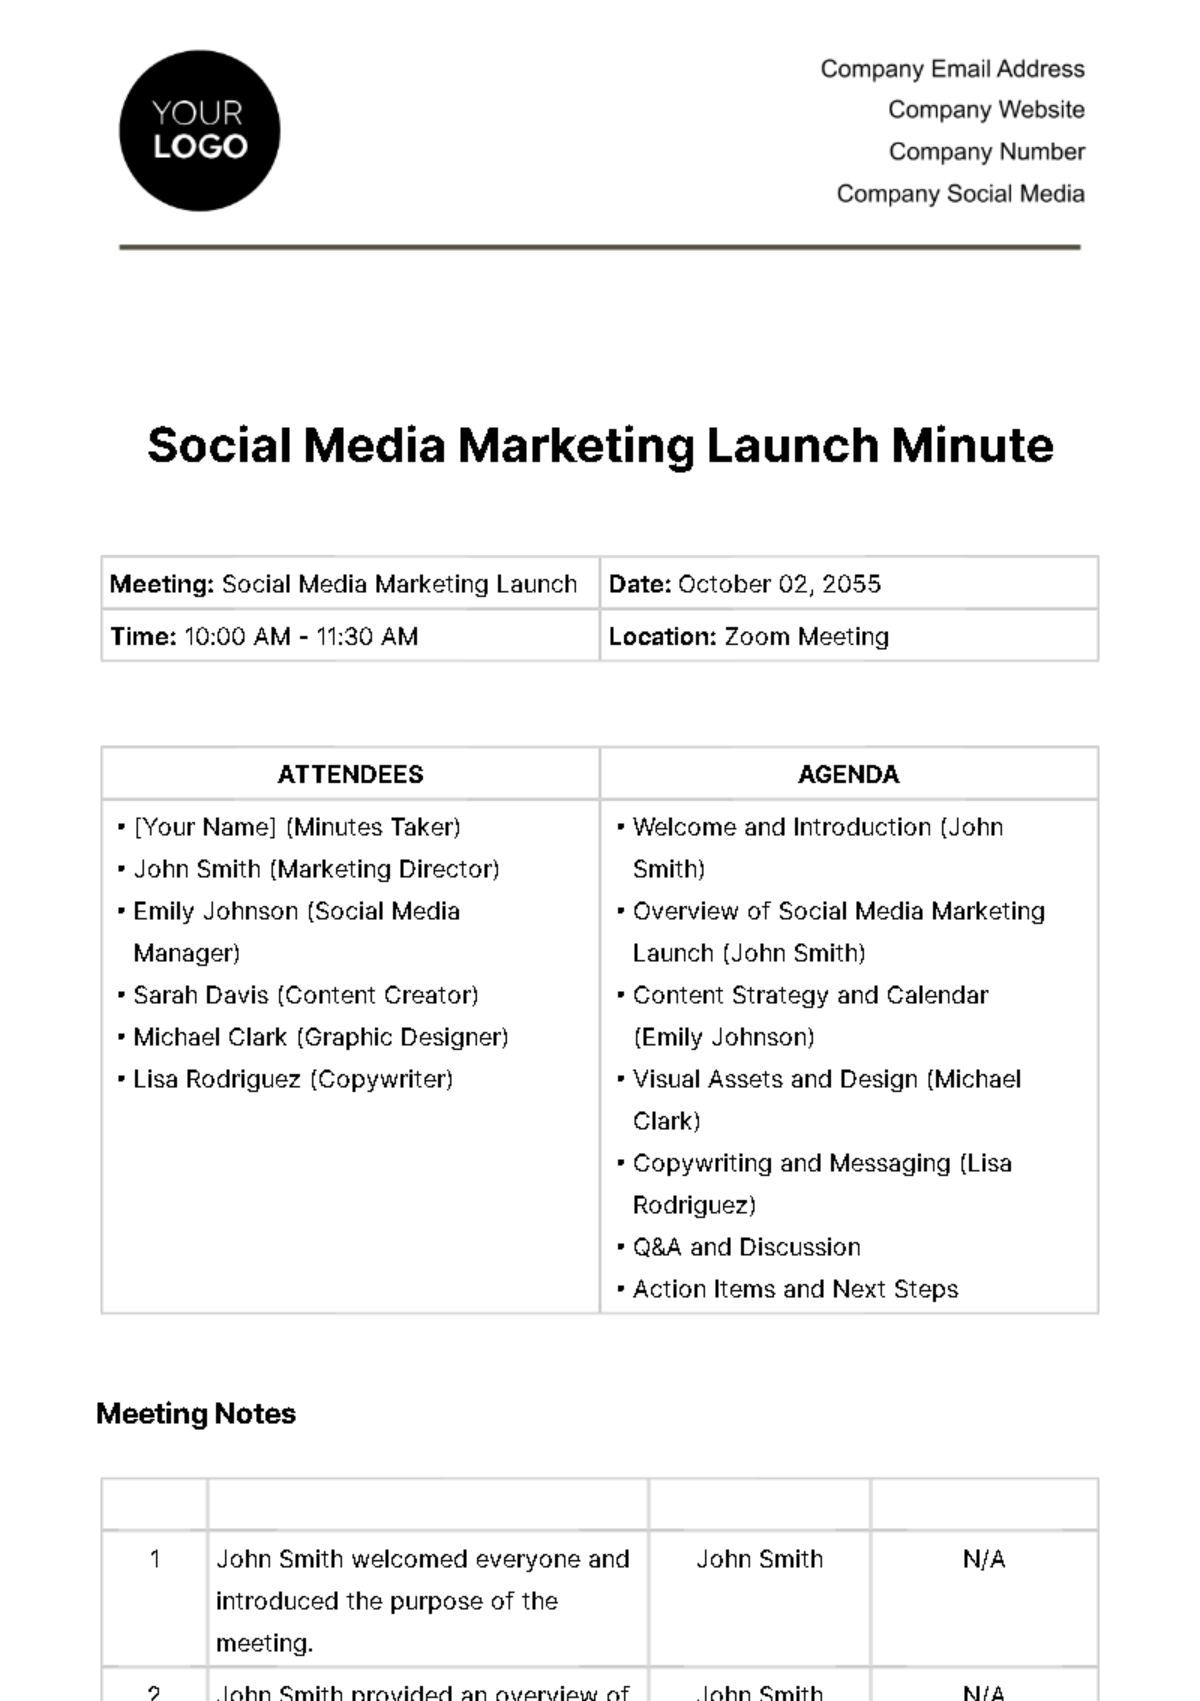 Free Social Media Marketing Launch Minute Template